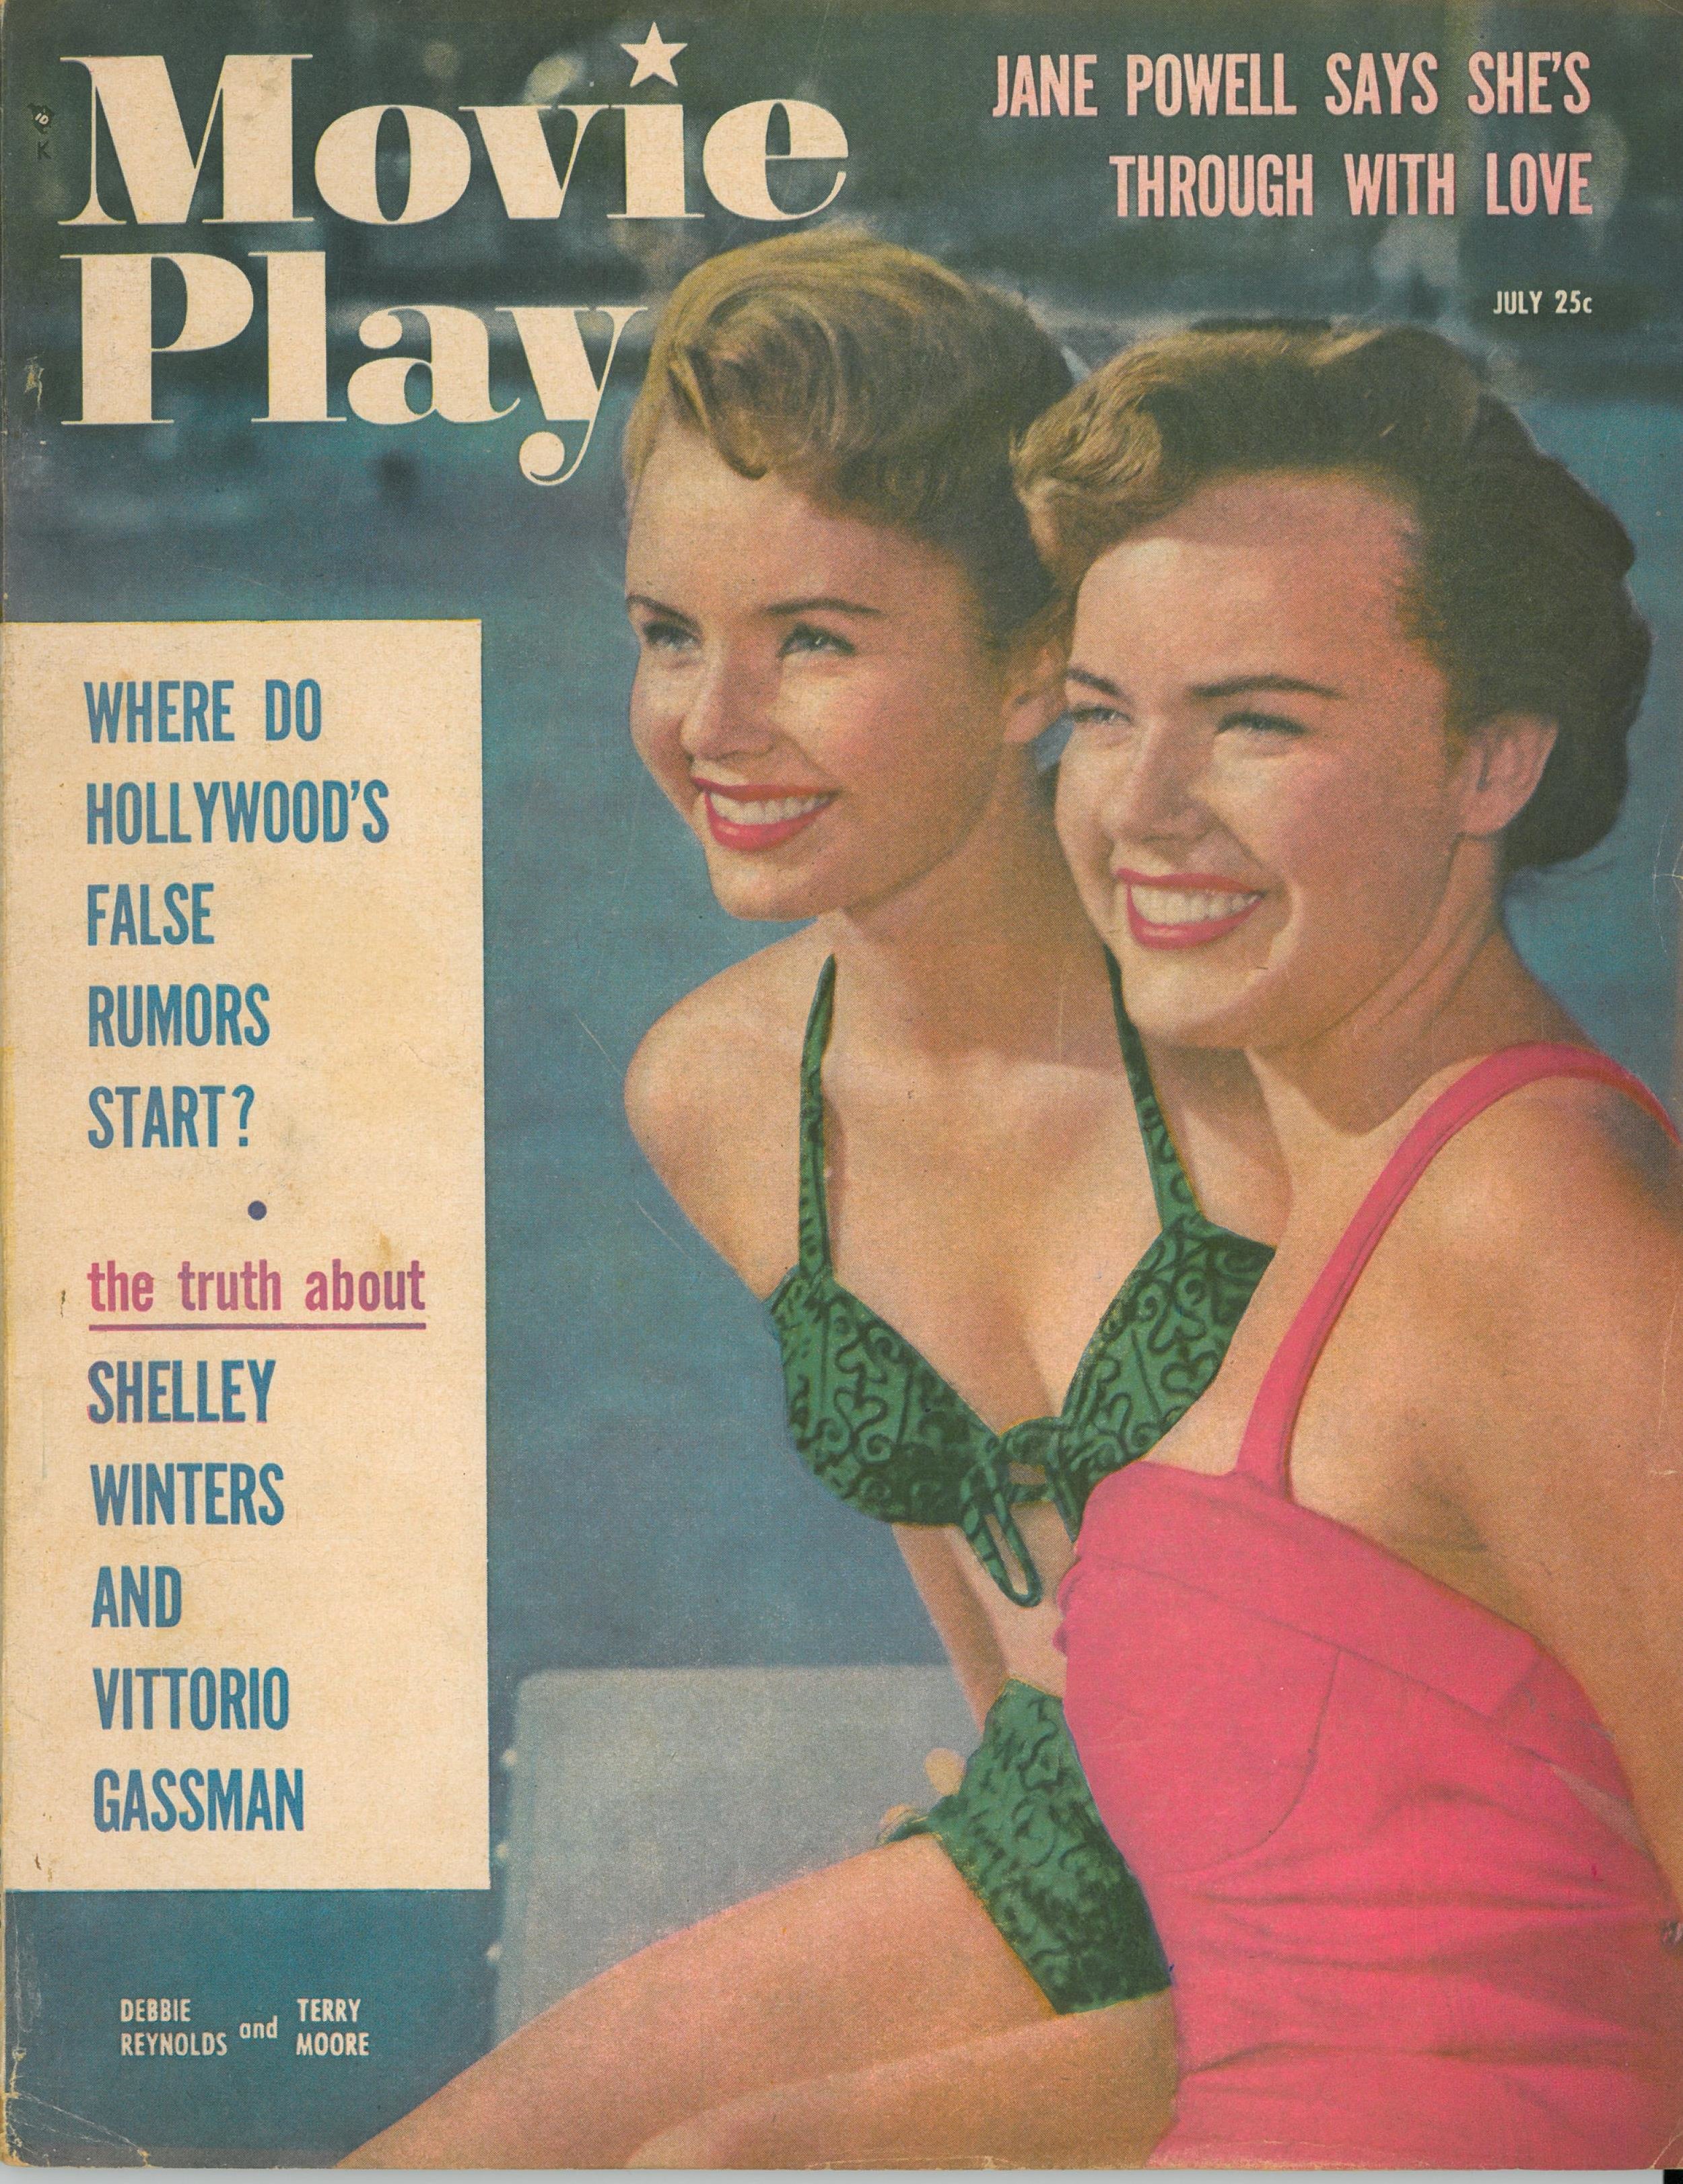  One of the first fan magazine stories about Bob. July 1954 issue of  Movie Play  was on newsstands in early June 1954, weeks ahead of release of  The Caine Mutiny .  Significant coverage of Bob in fan publications began in July and August 1954. 